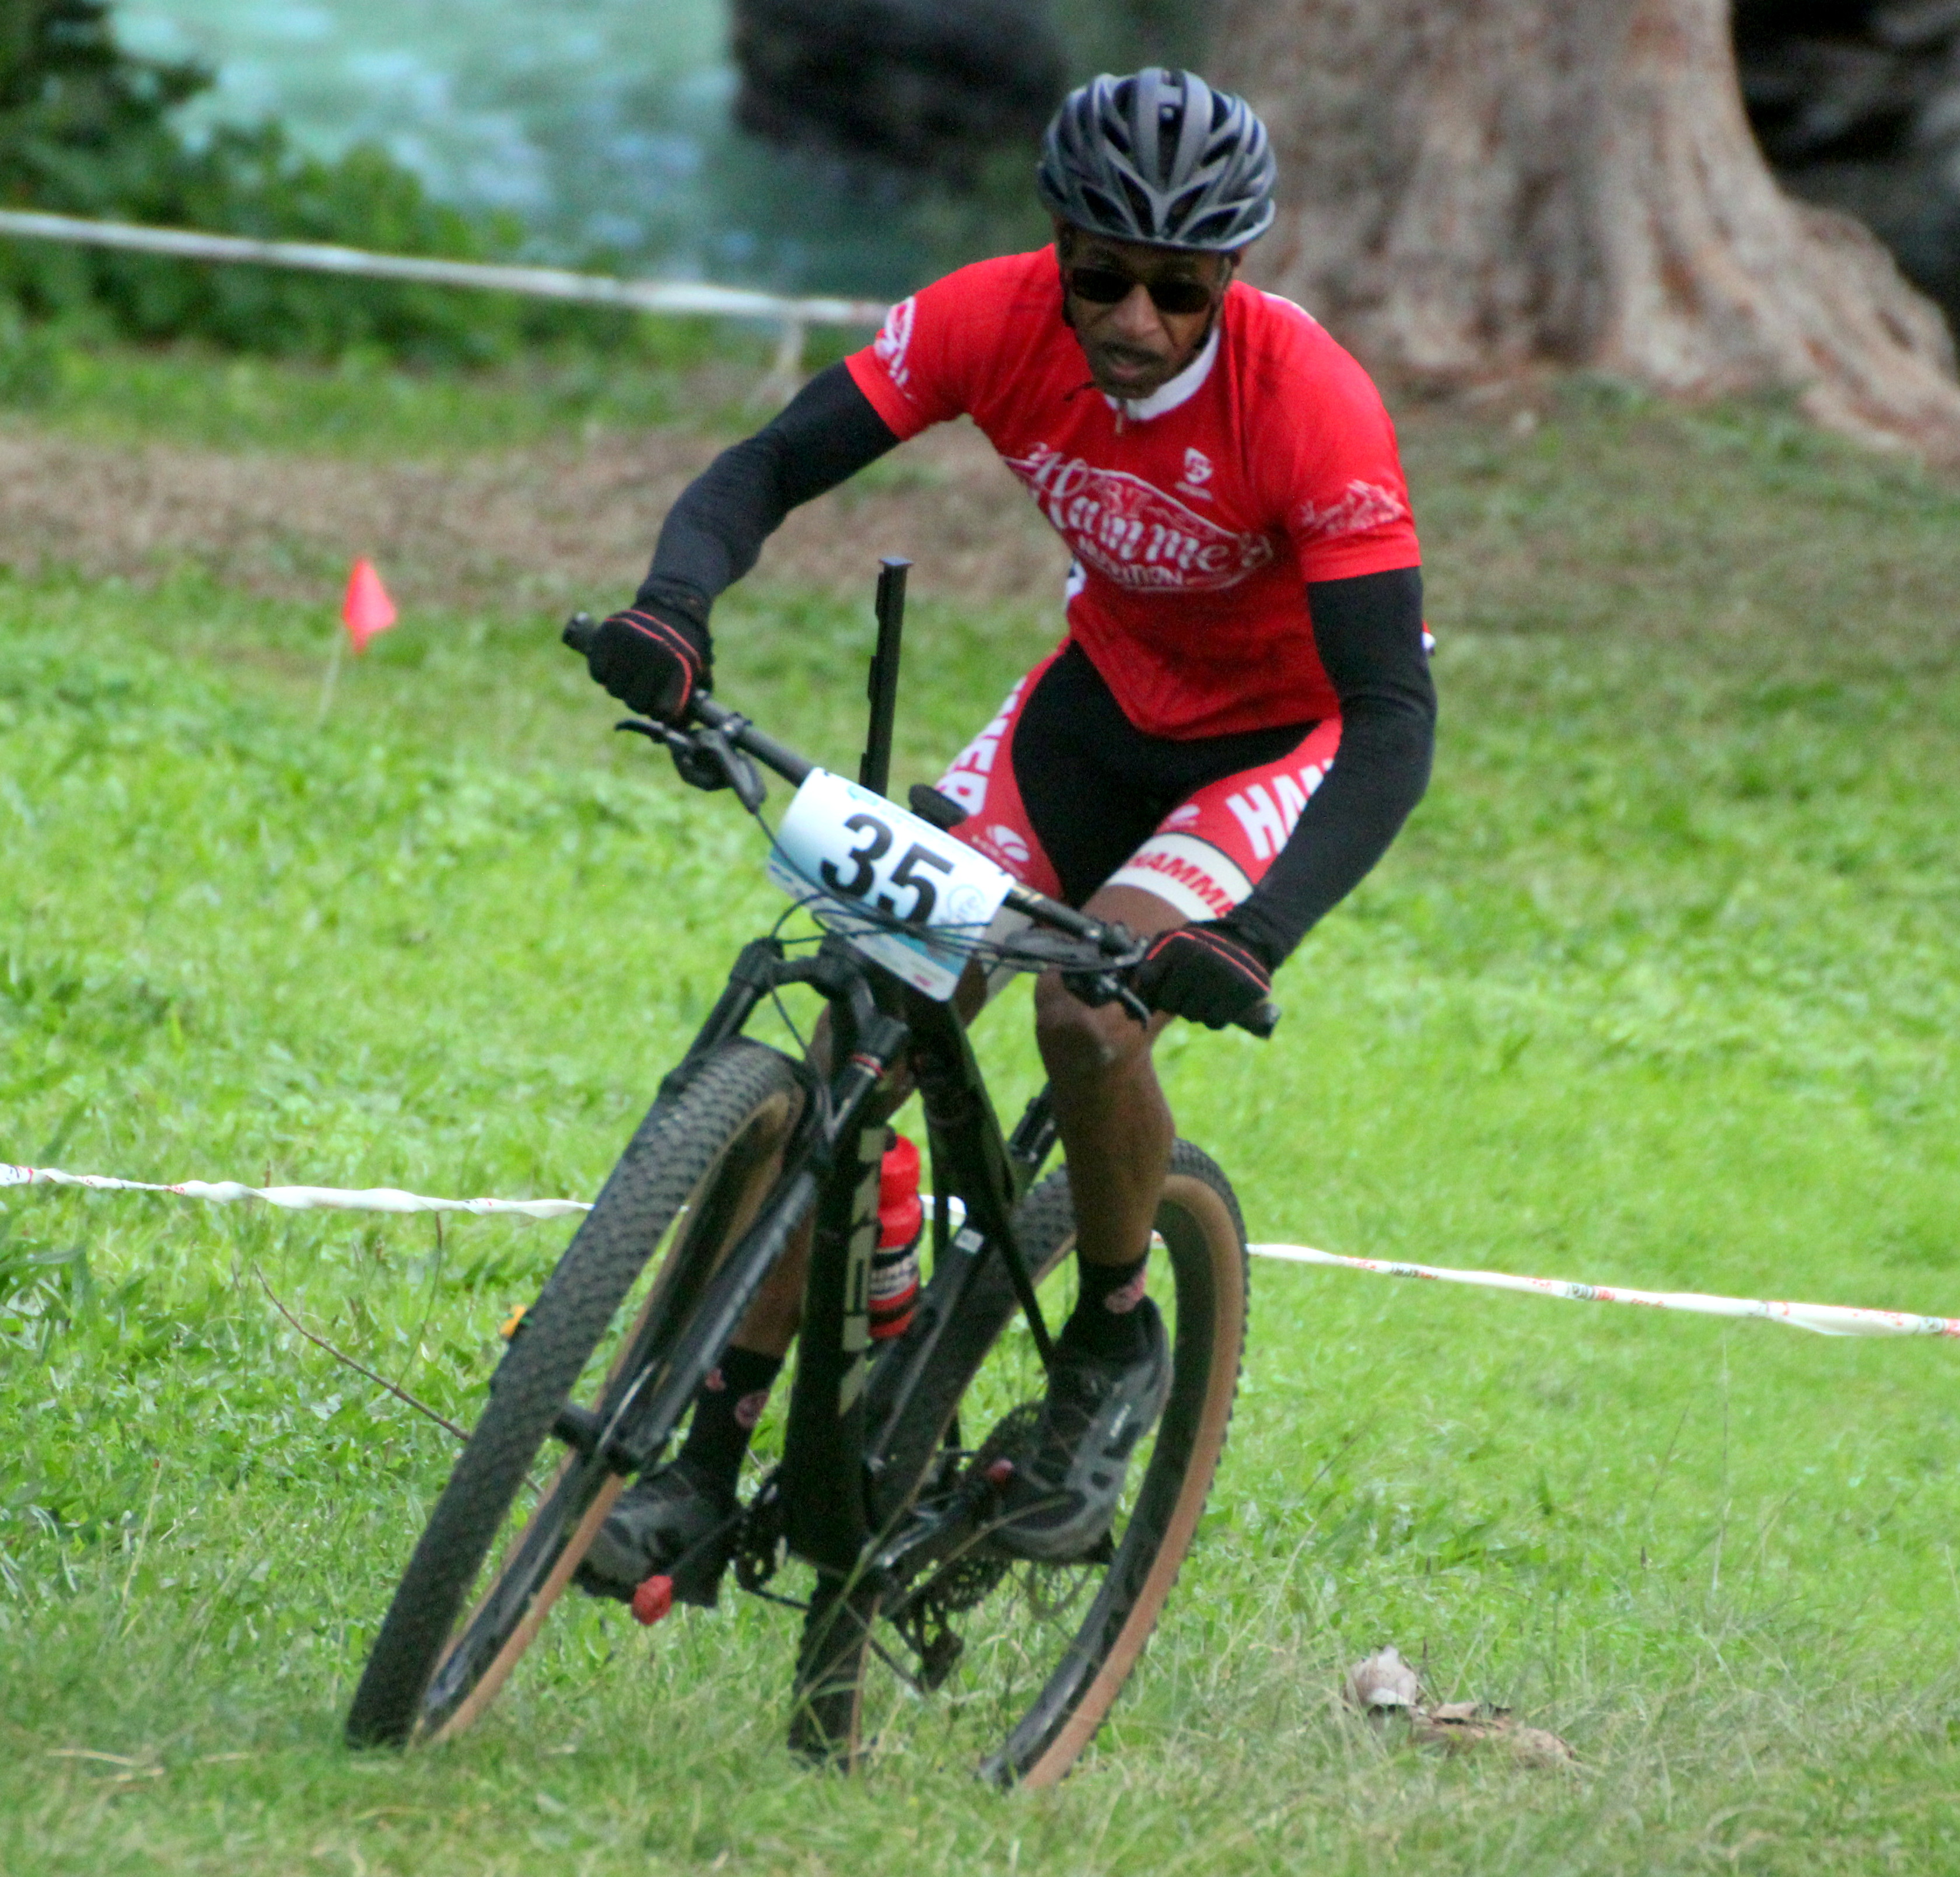 Fattire Massive Mountain Bike Division Point Leaders (Cycling)